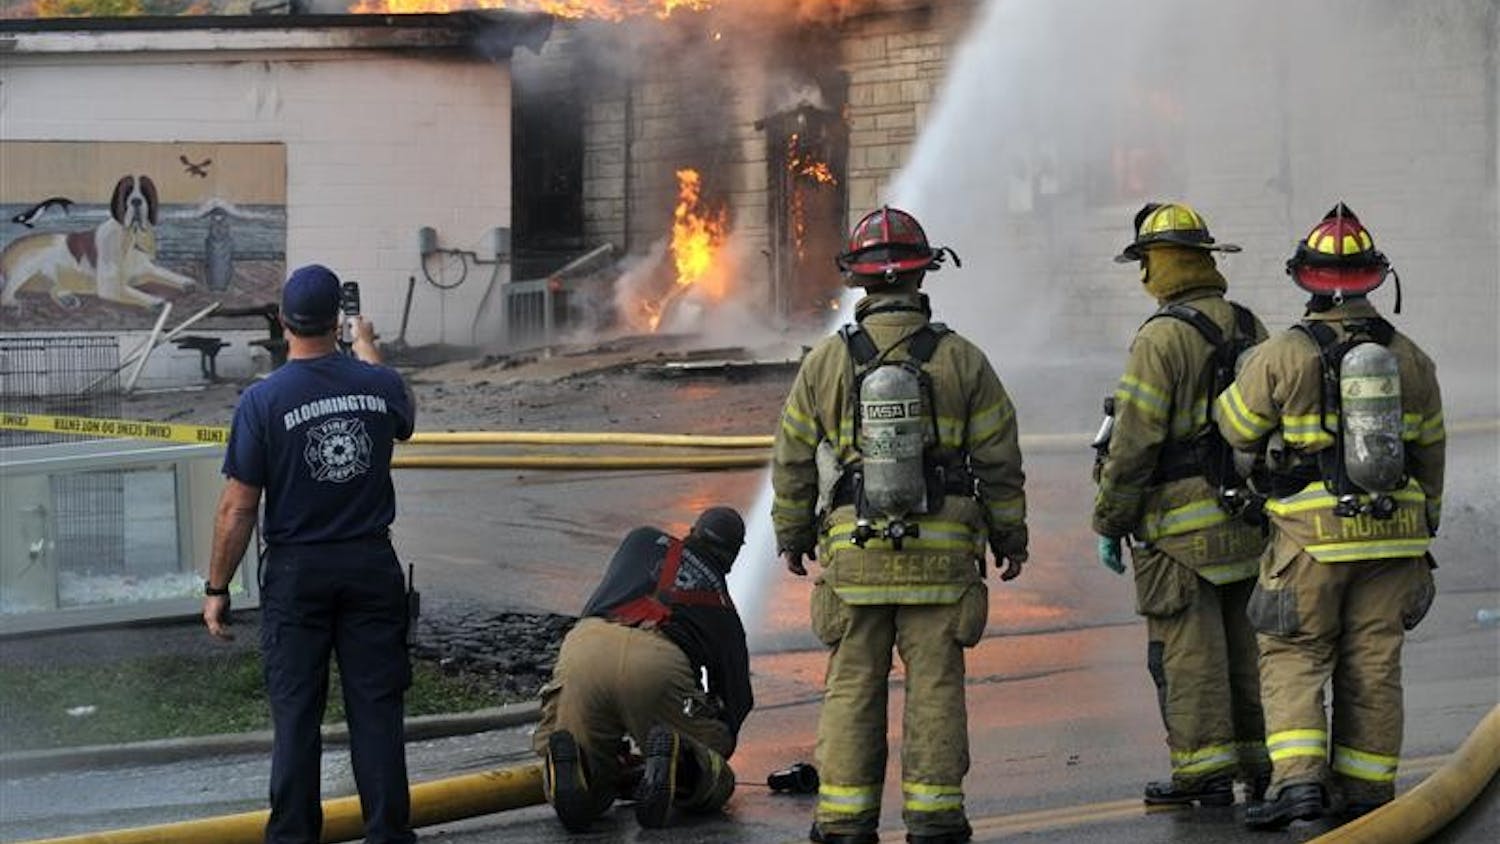 Bloomington fire fighters battle a blaze on Nov. 3 at Delilah's Pet Shop, 1320 N. College Ave. Fire fighters worked for three hours to extinguish the fire, which destroyed the building and killed 20 animals.